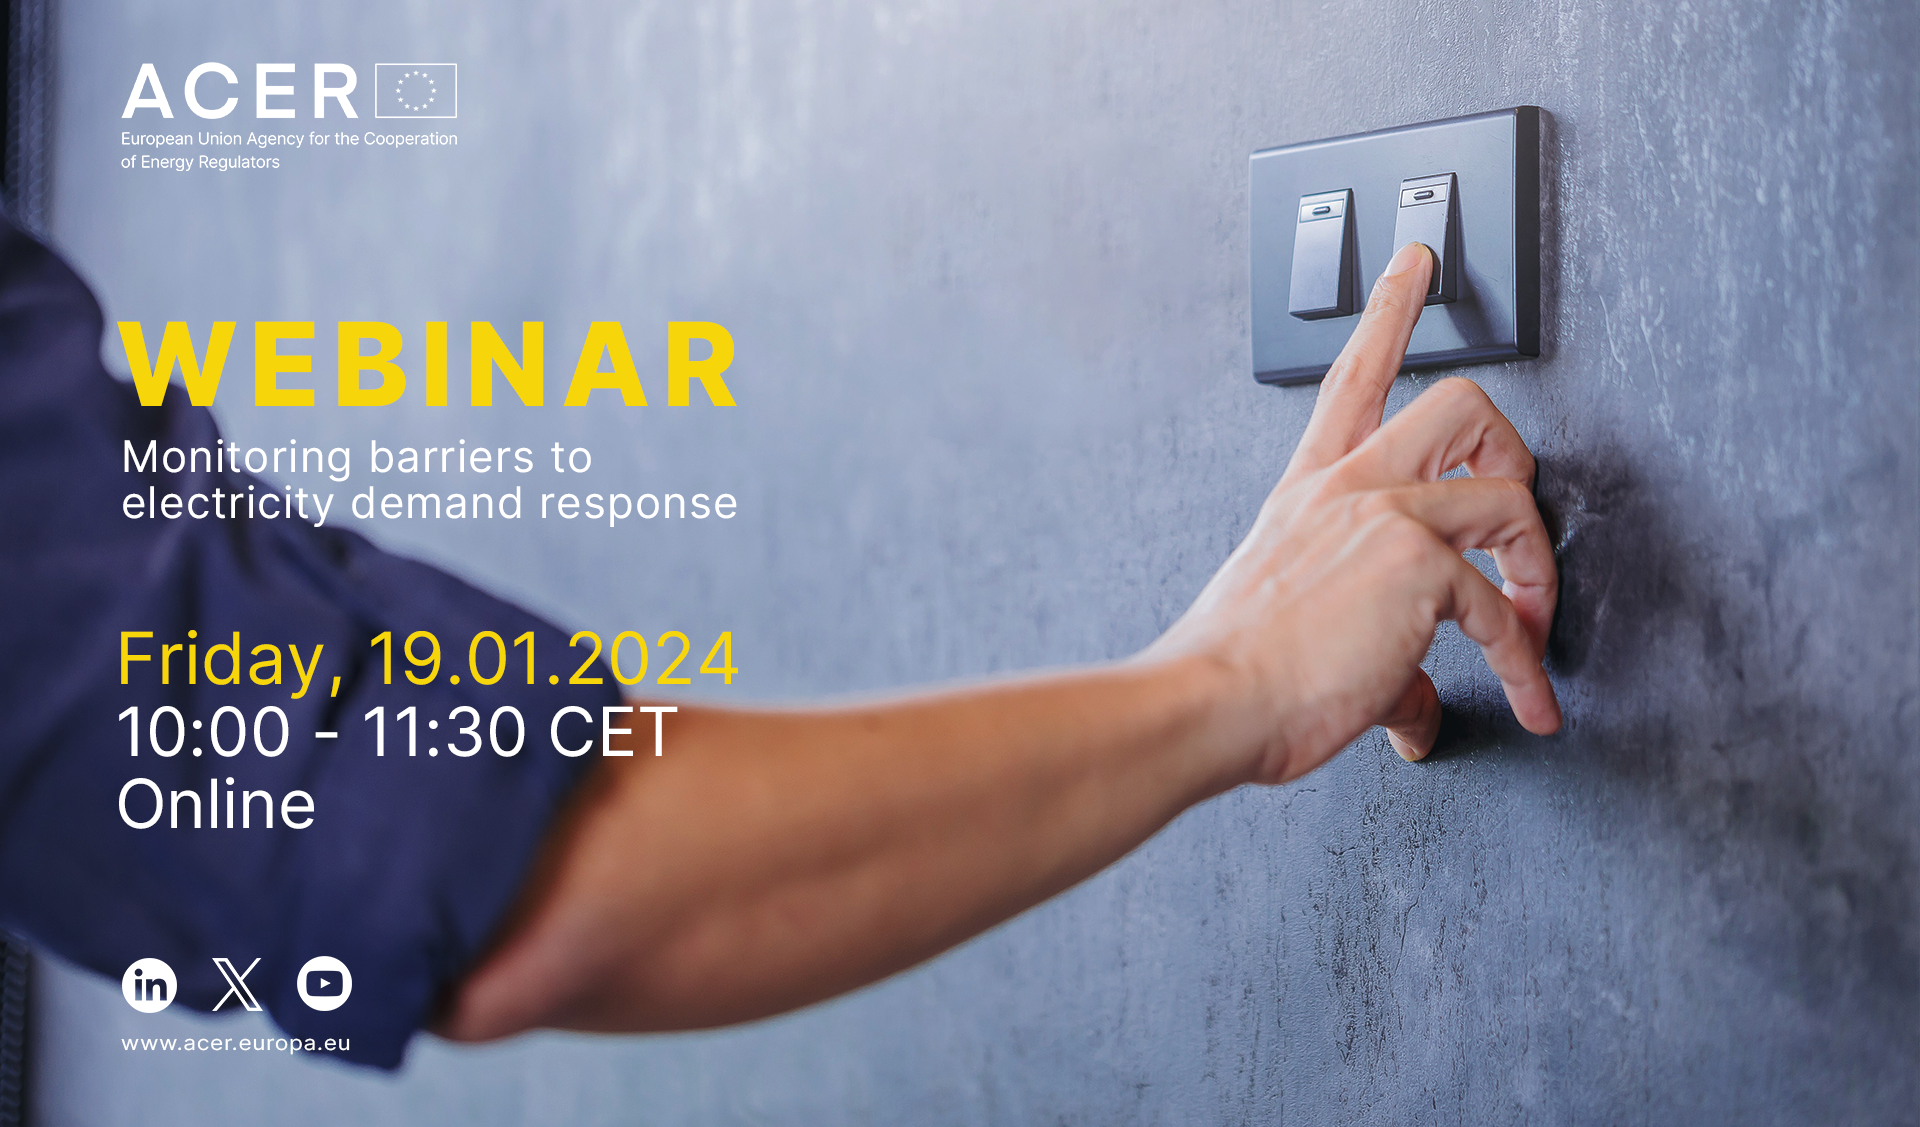 ACER webinar on monitoring barriers to electricity demand response